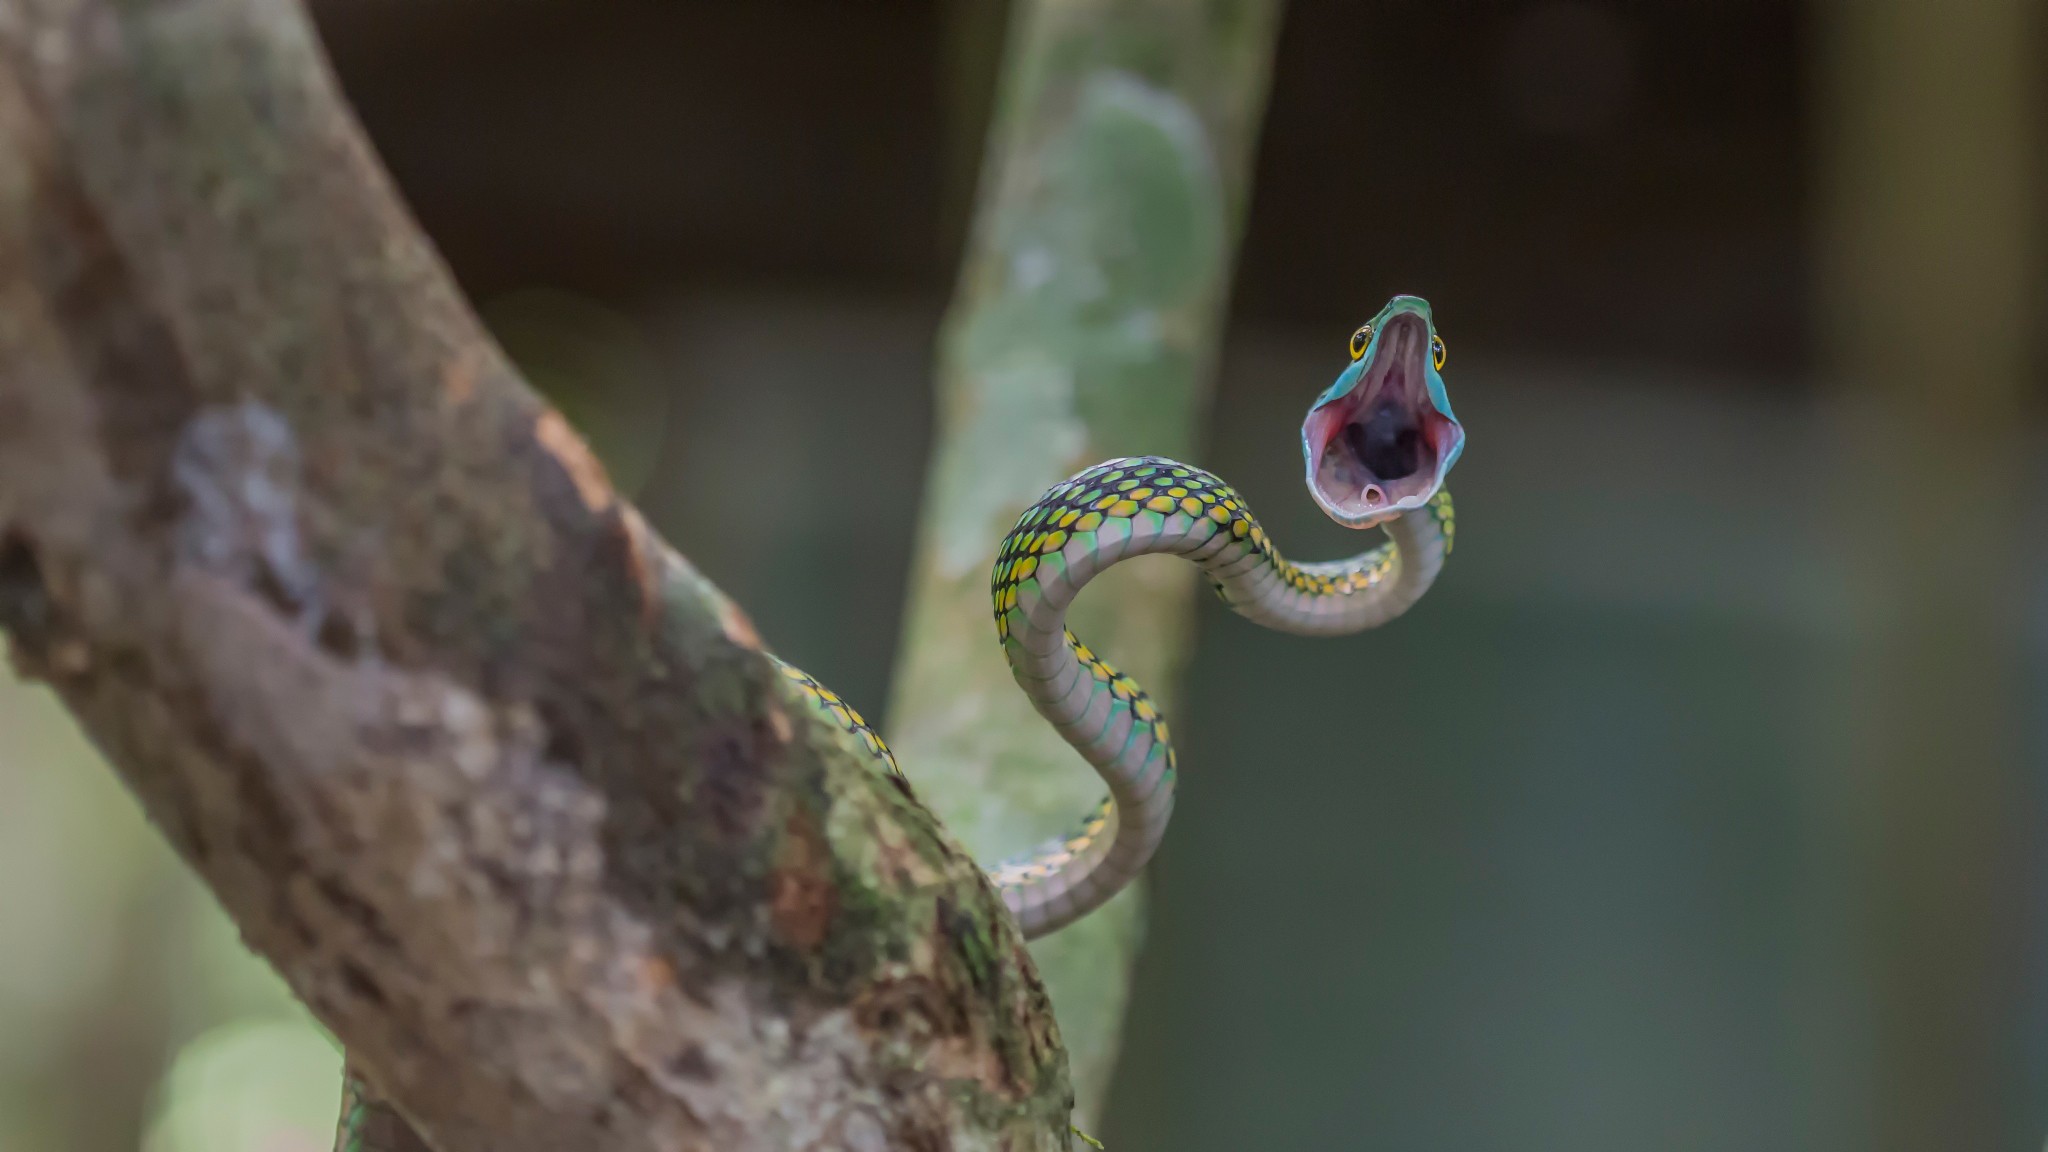 General 2048x1152 snake reptiles open mouth animals nature